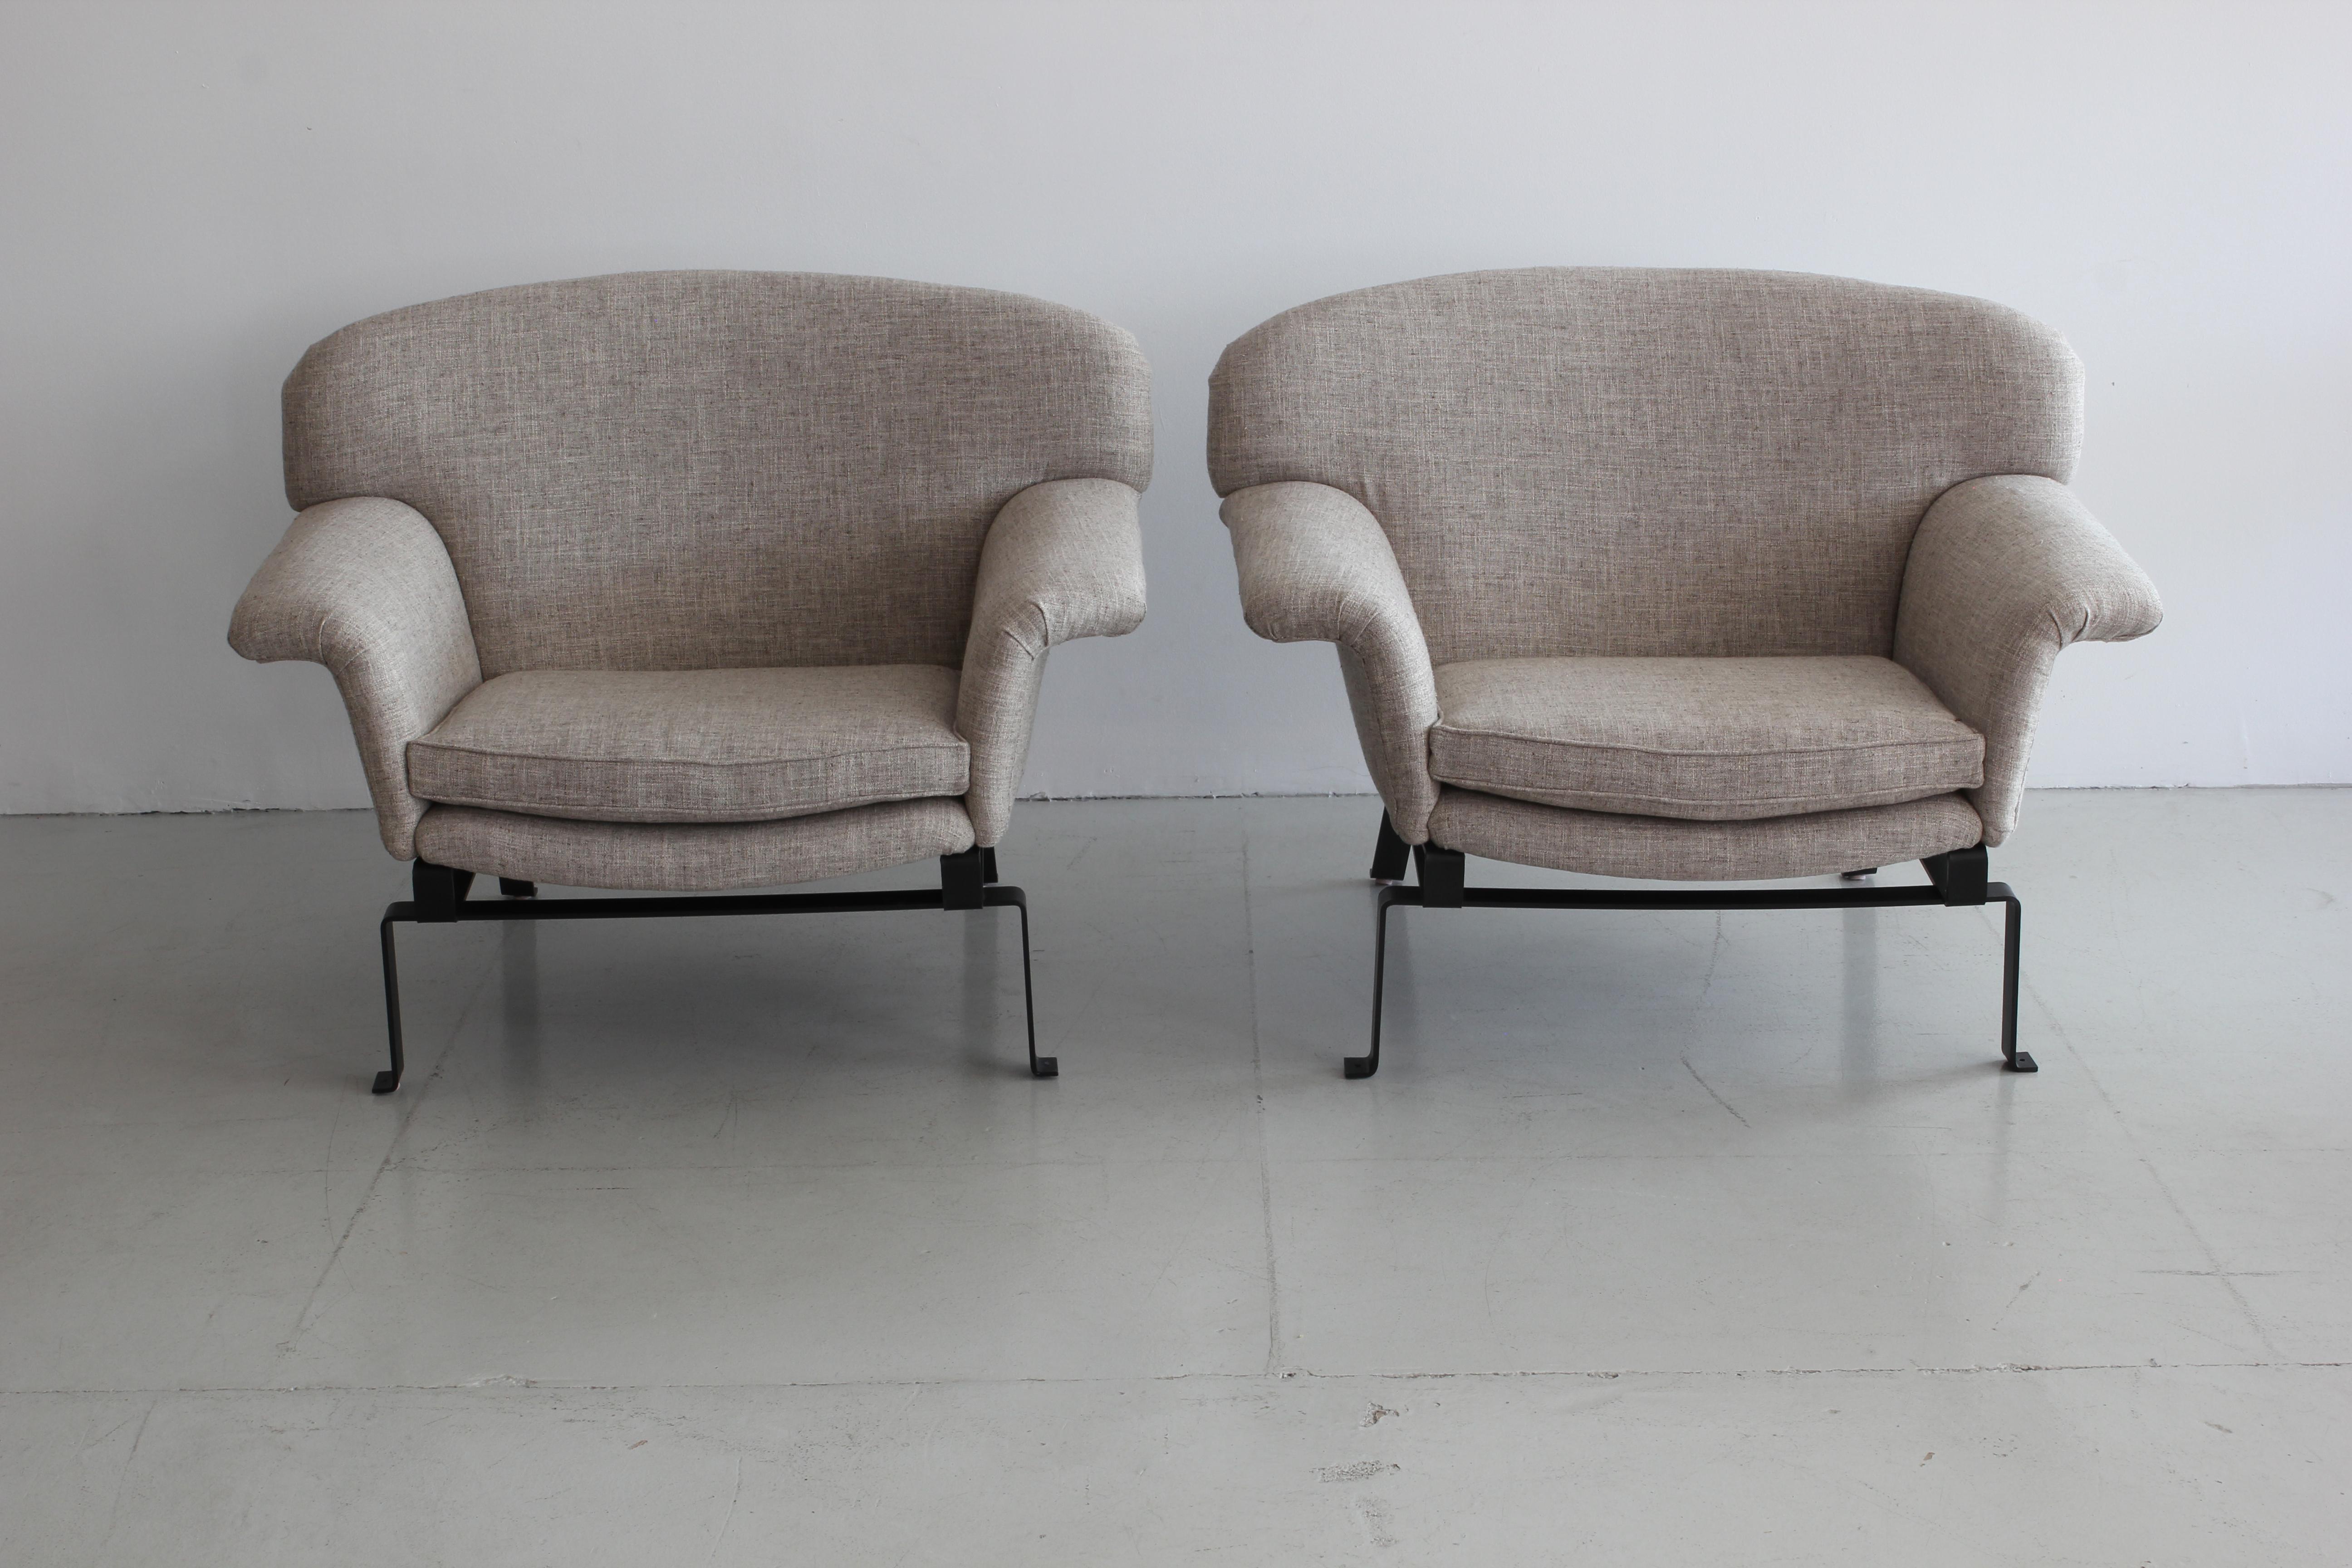 Fantastic shaped Italian chairs with wing arms and iron floating base. 
Newly upholstered in linen.